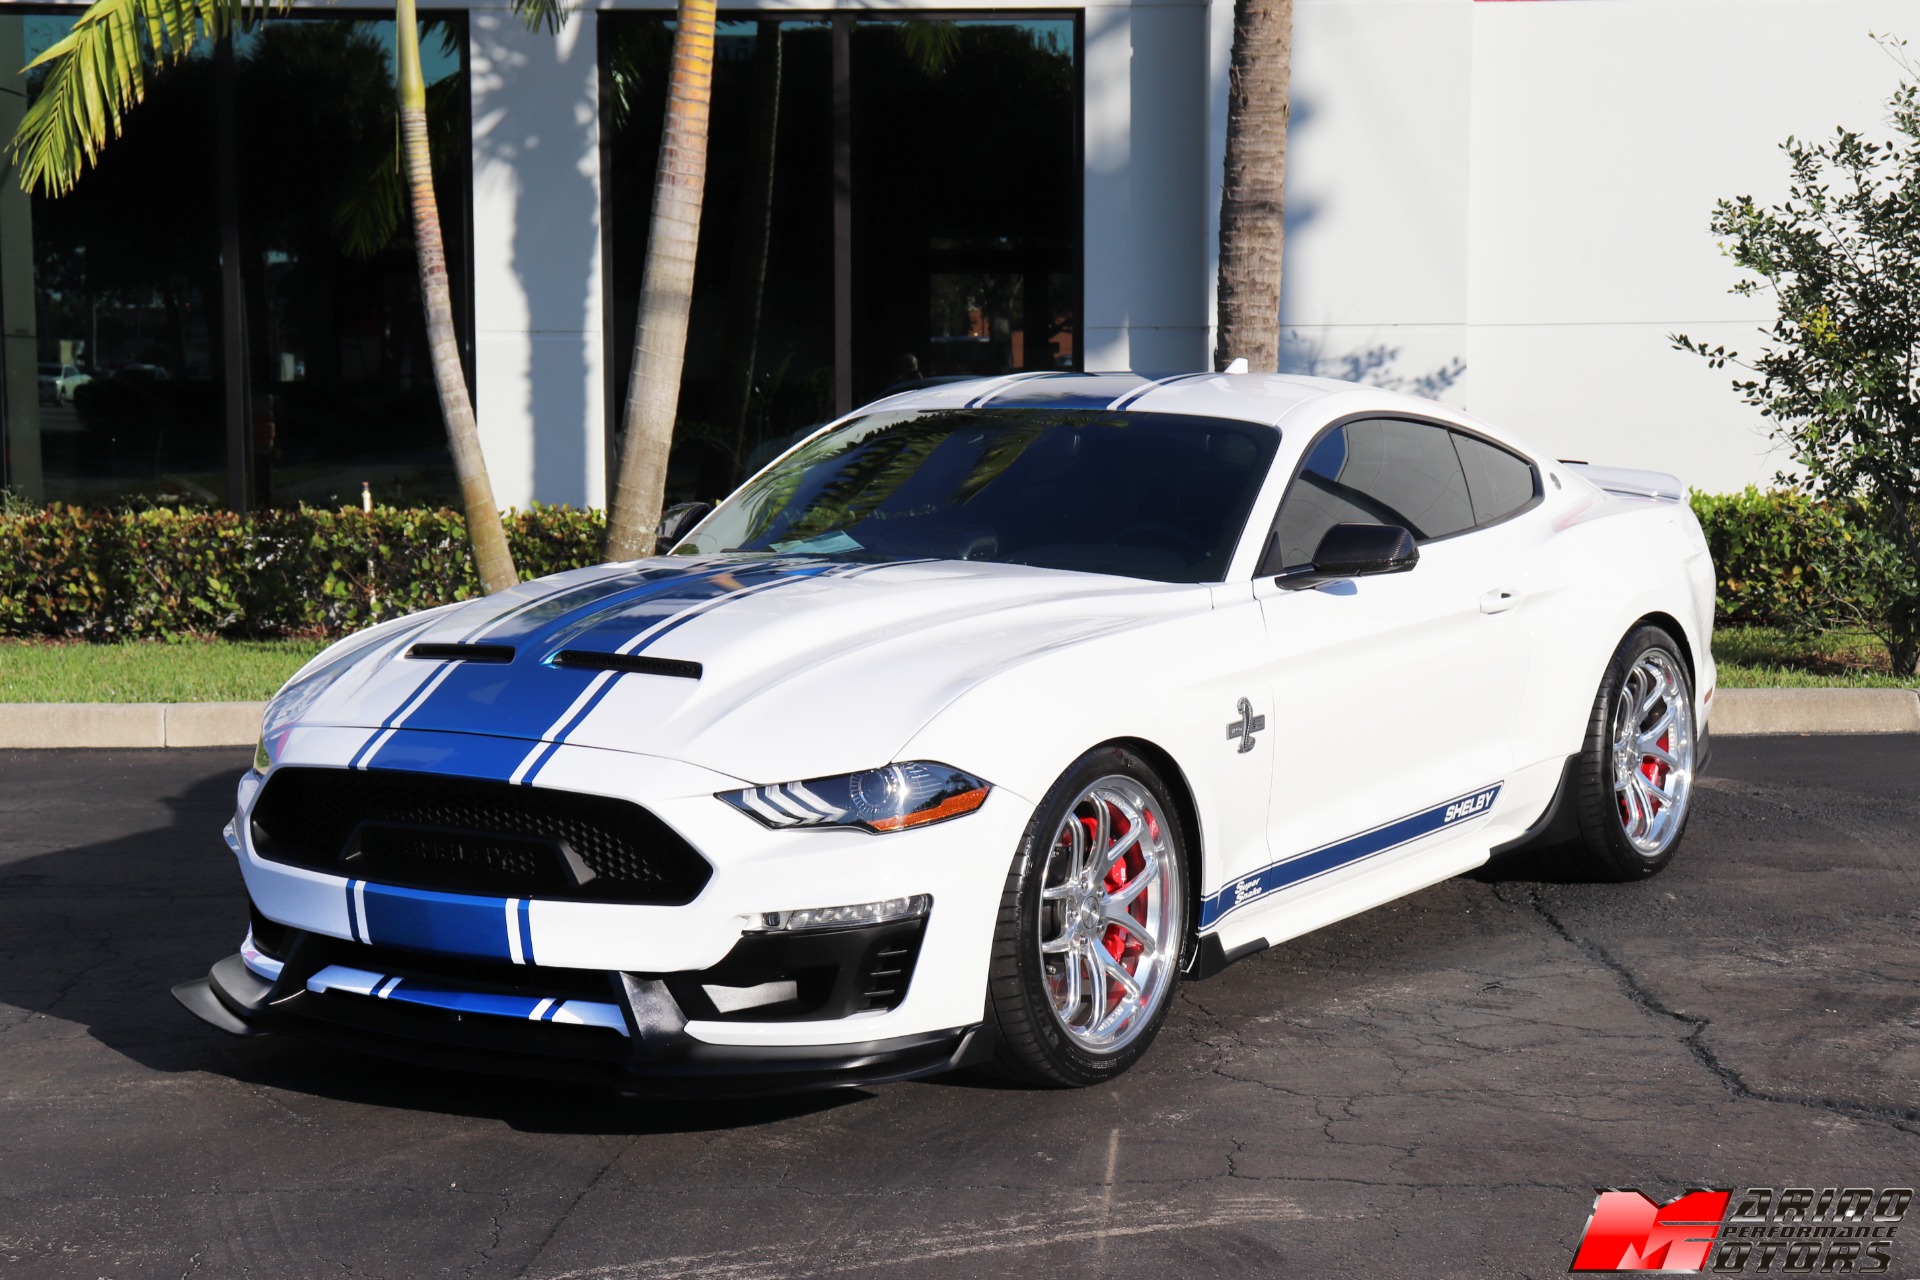 Used-2020-Ford-Mustang-Shelby-Super-Snake